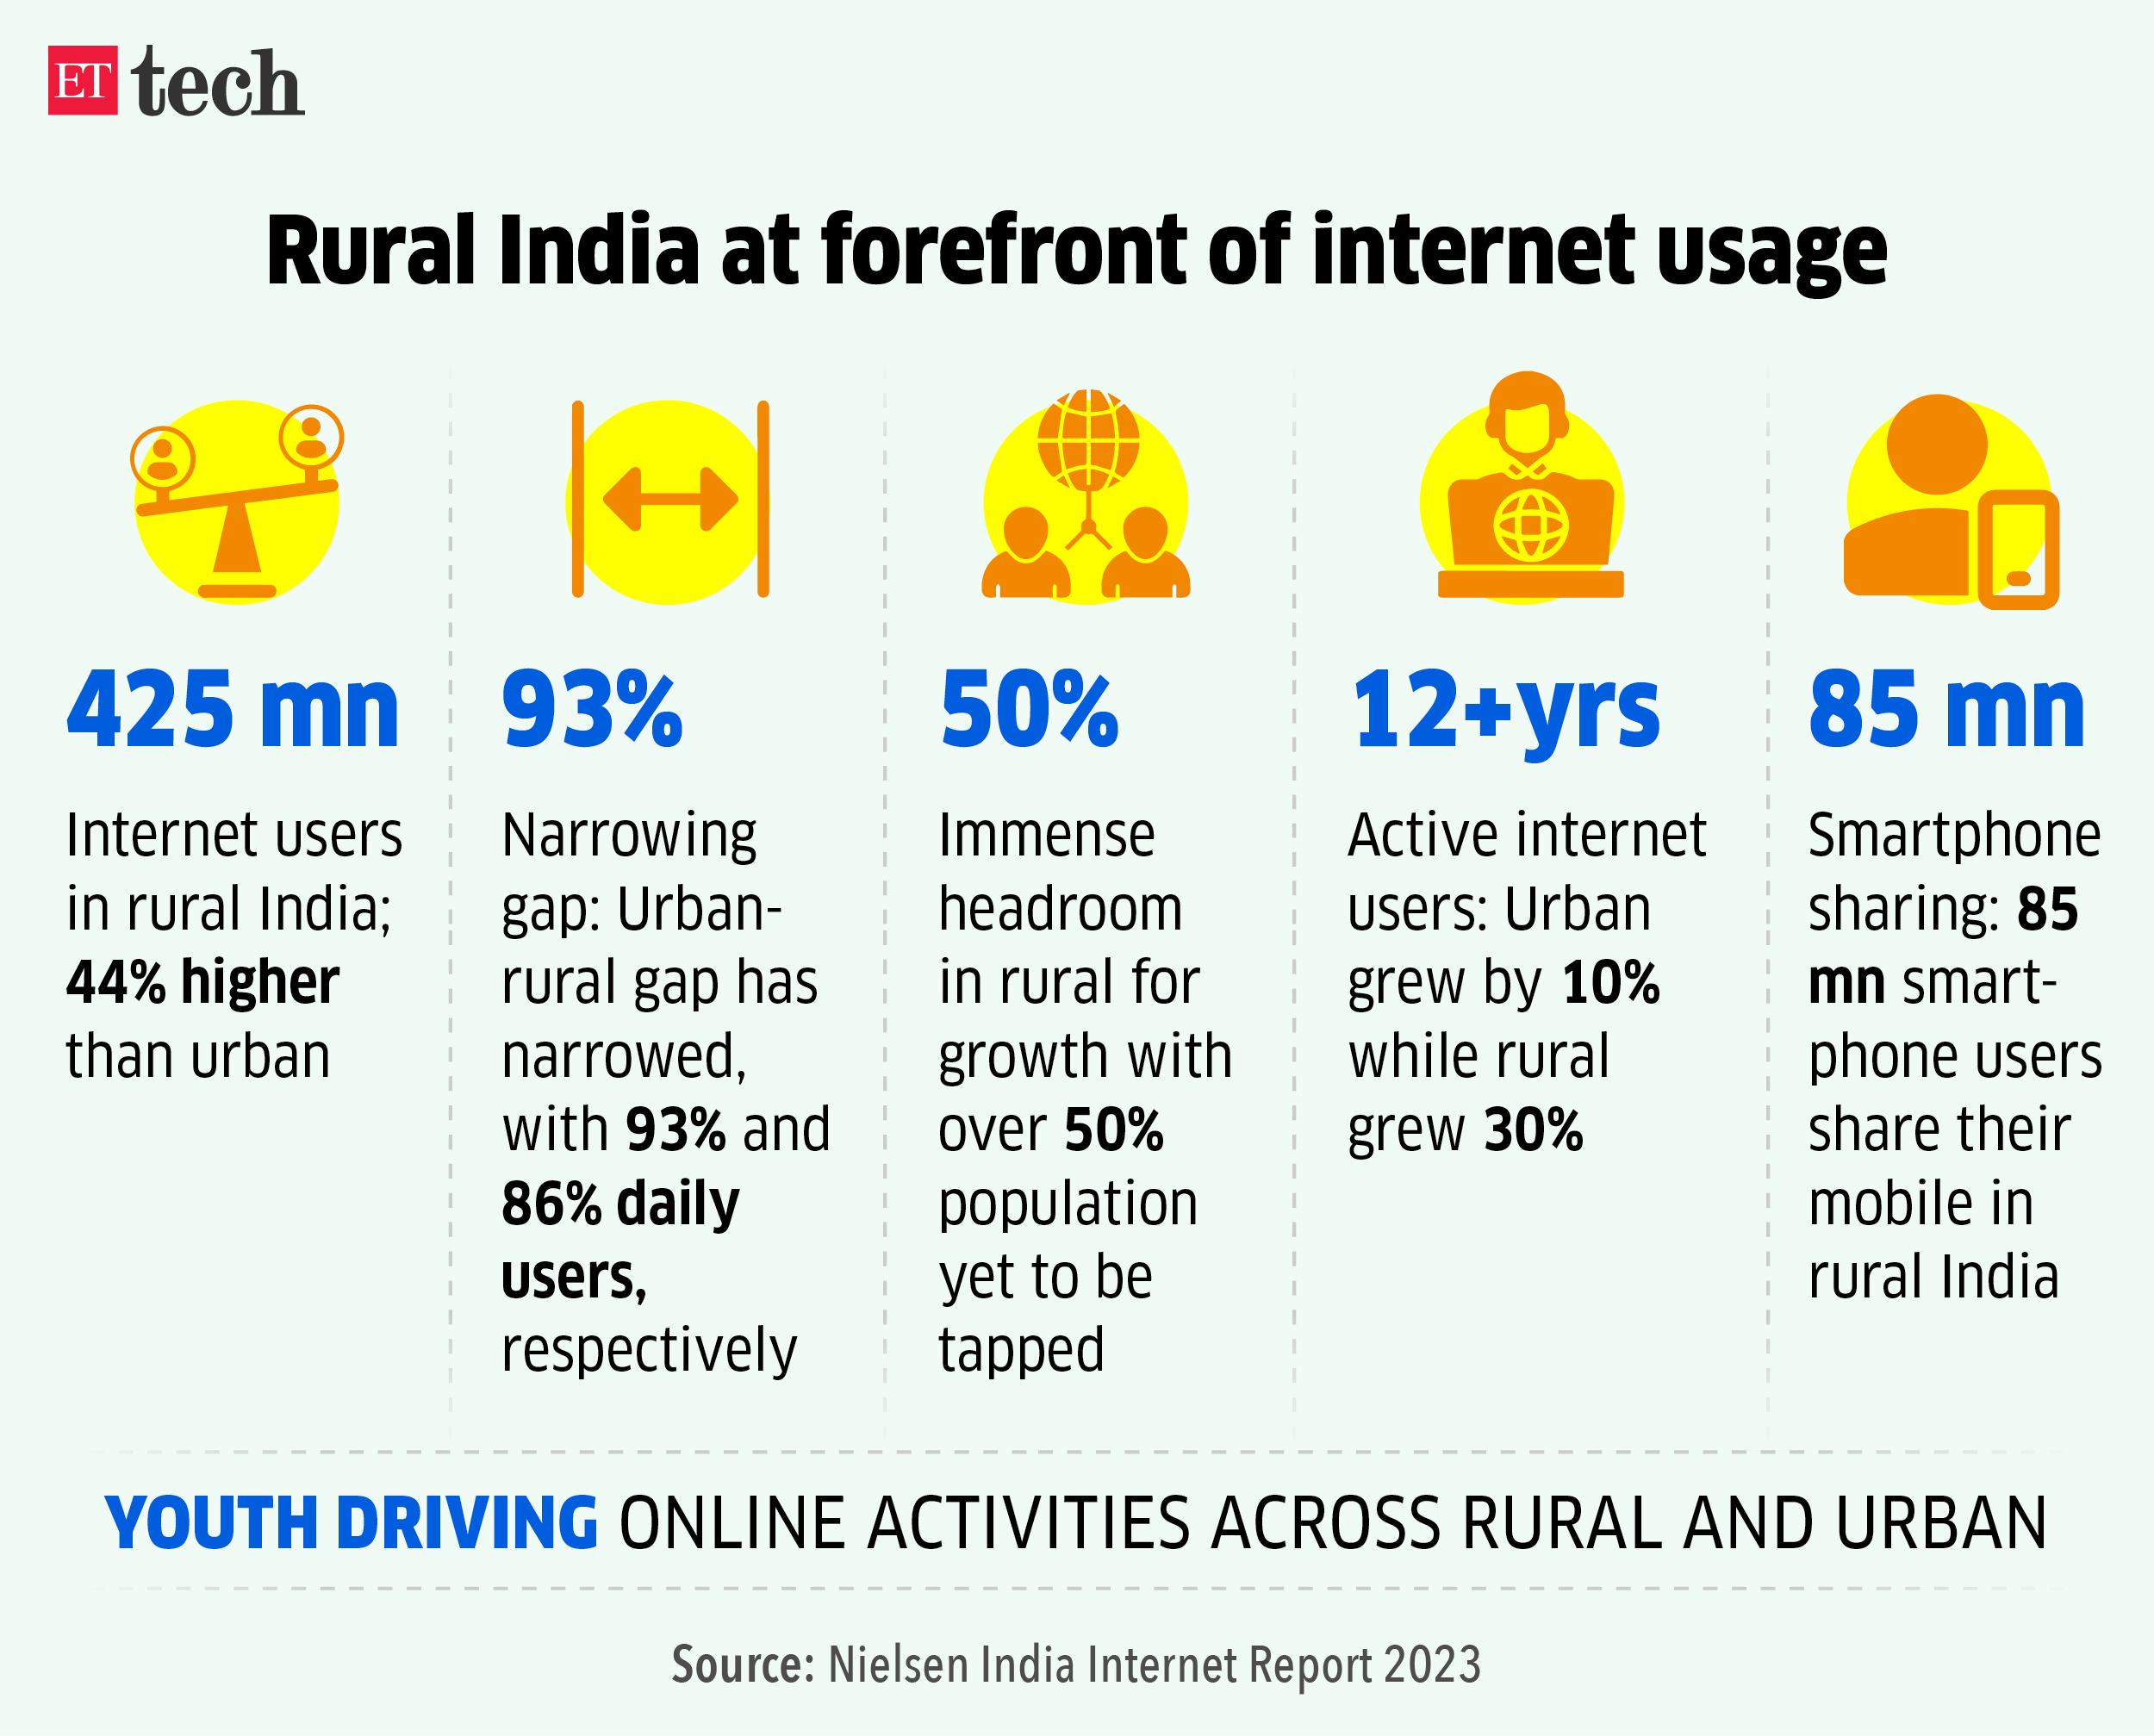 Rural India at forefront of internet penetration